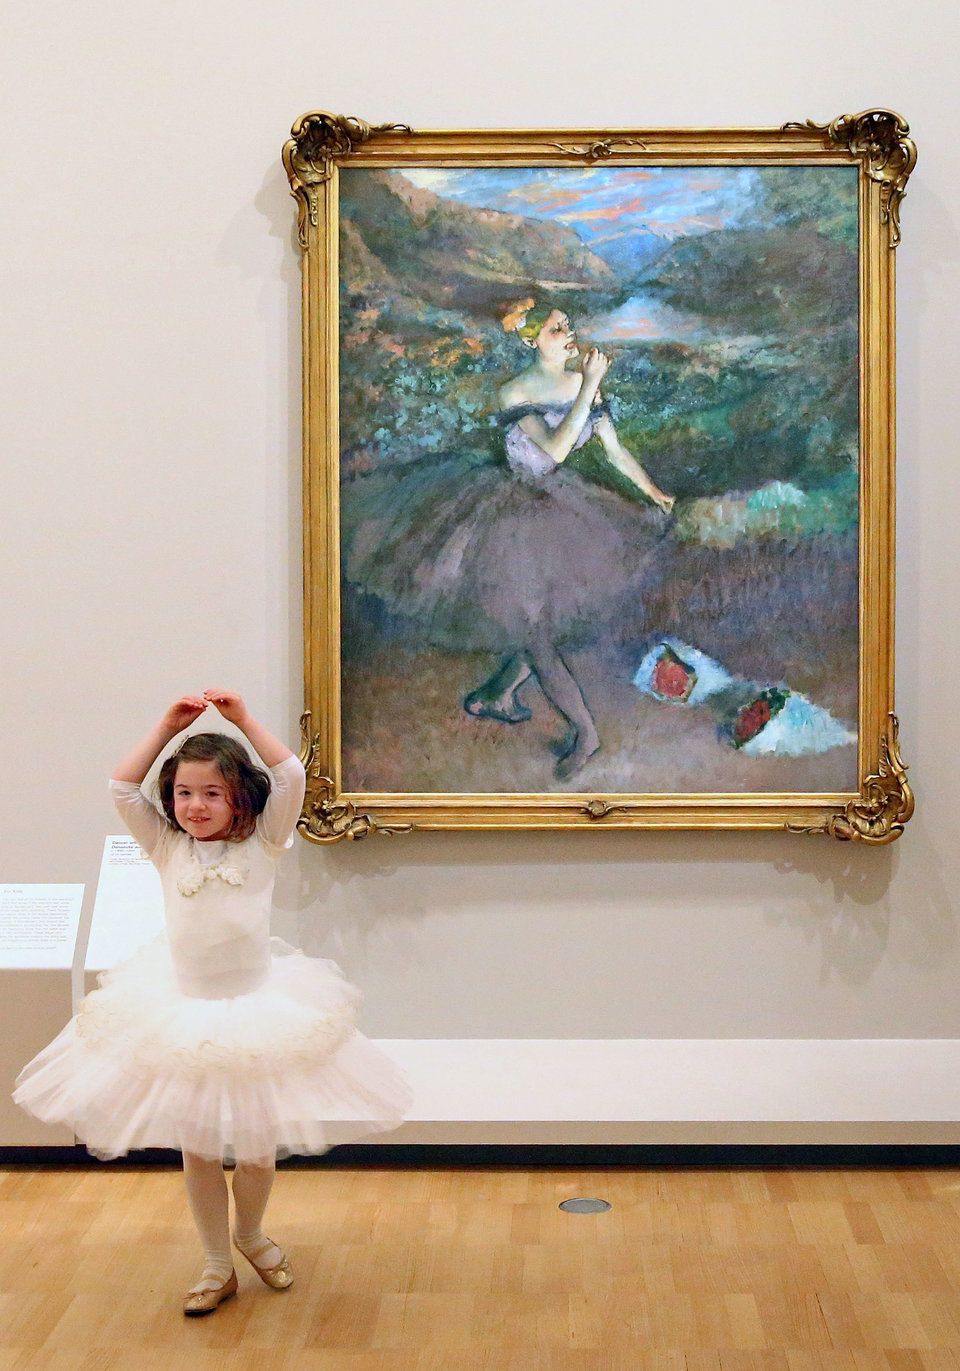 Six-year old ballerina Mena Deboil dances next to one of Edgar Degas' iconic ballet dancer paintings "Dancer with Bouquets."